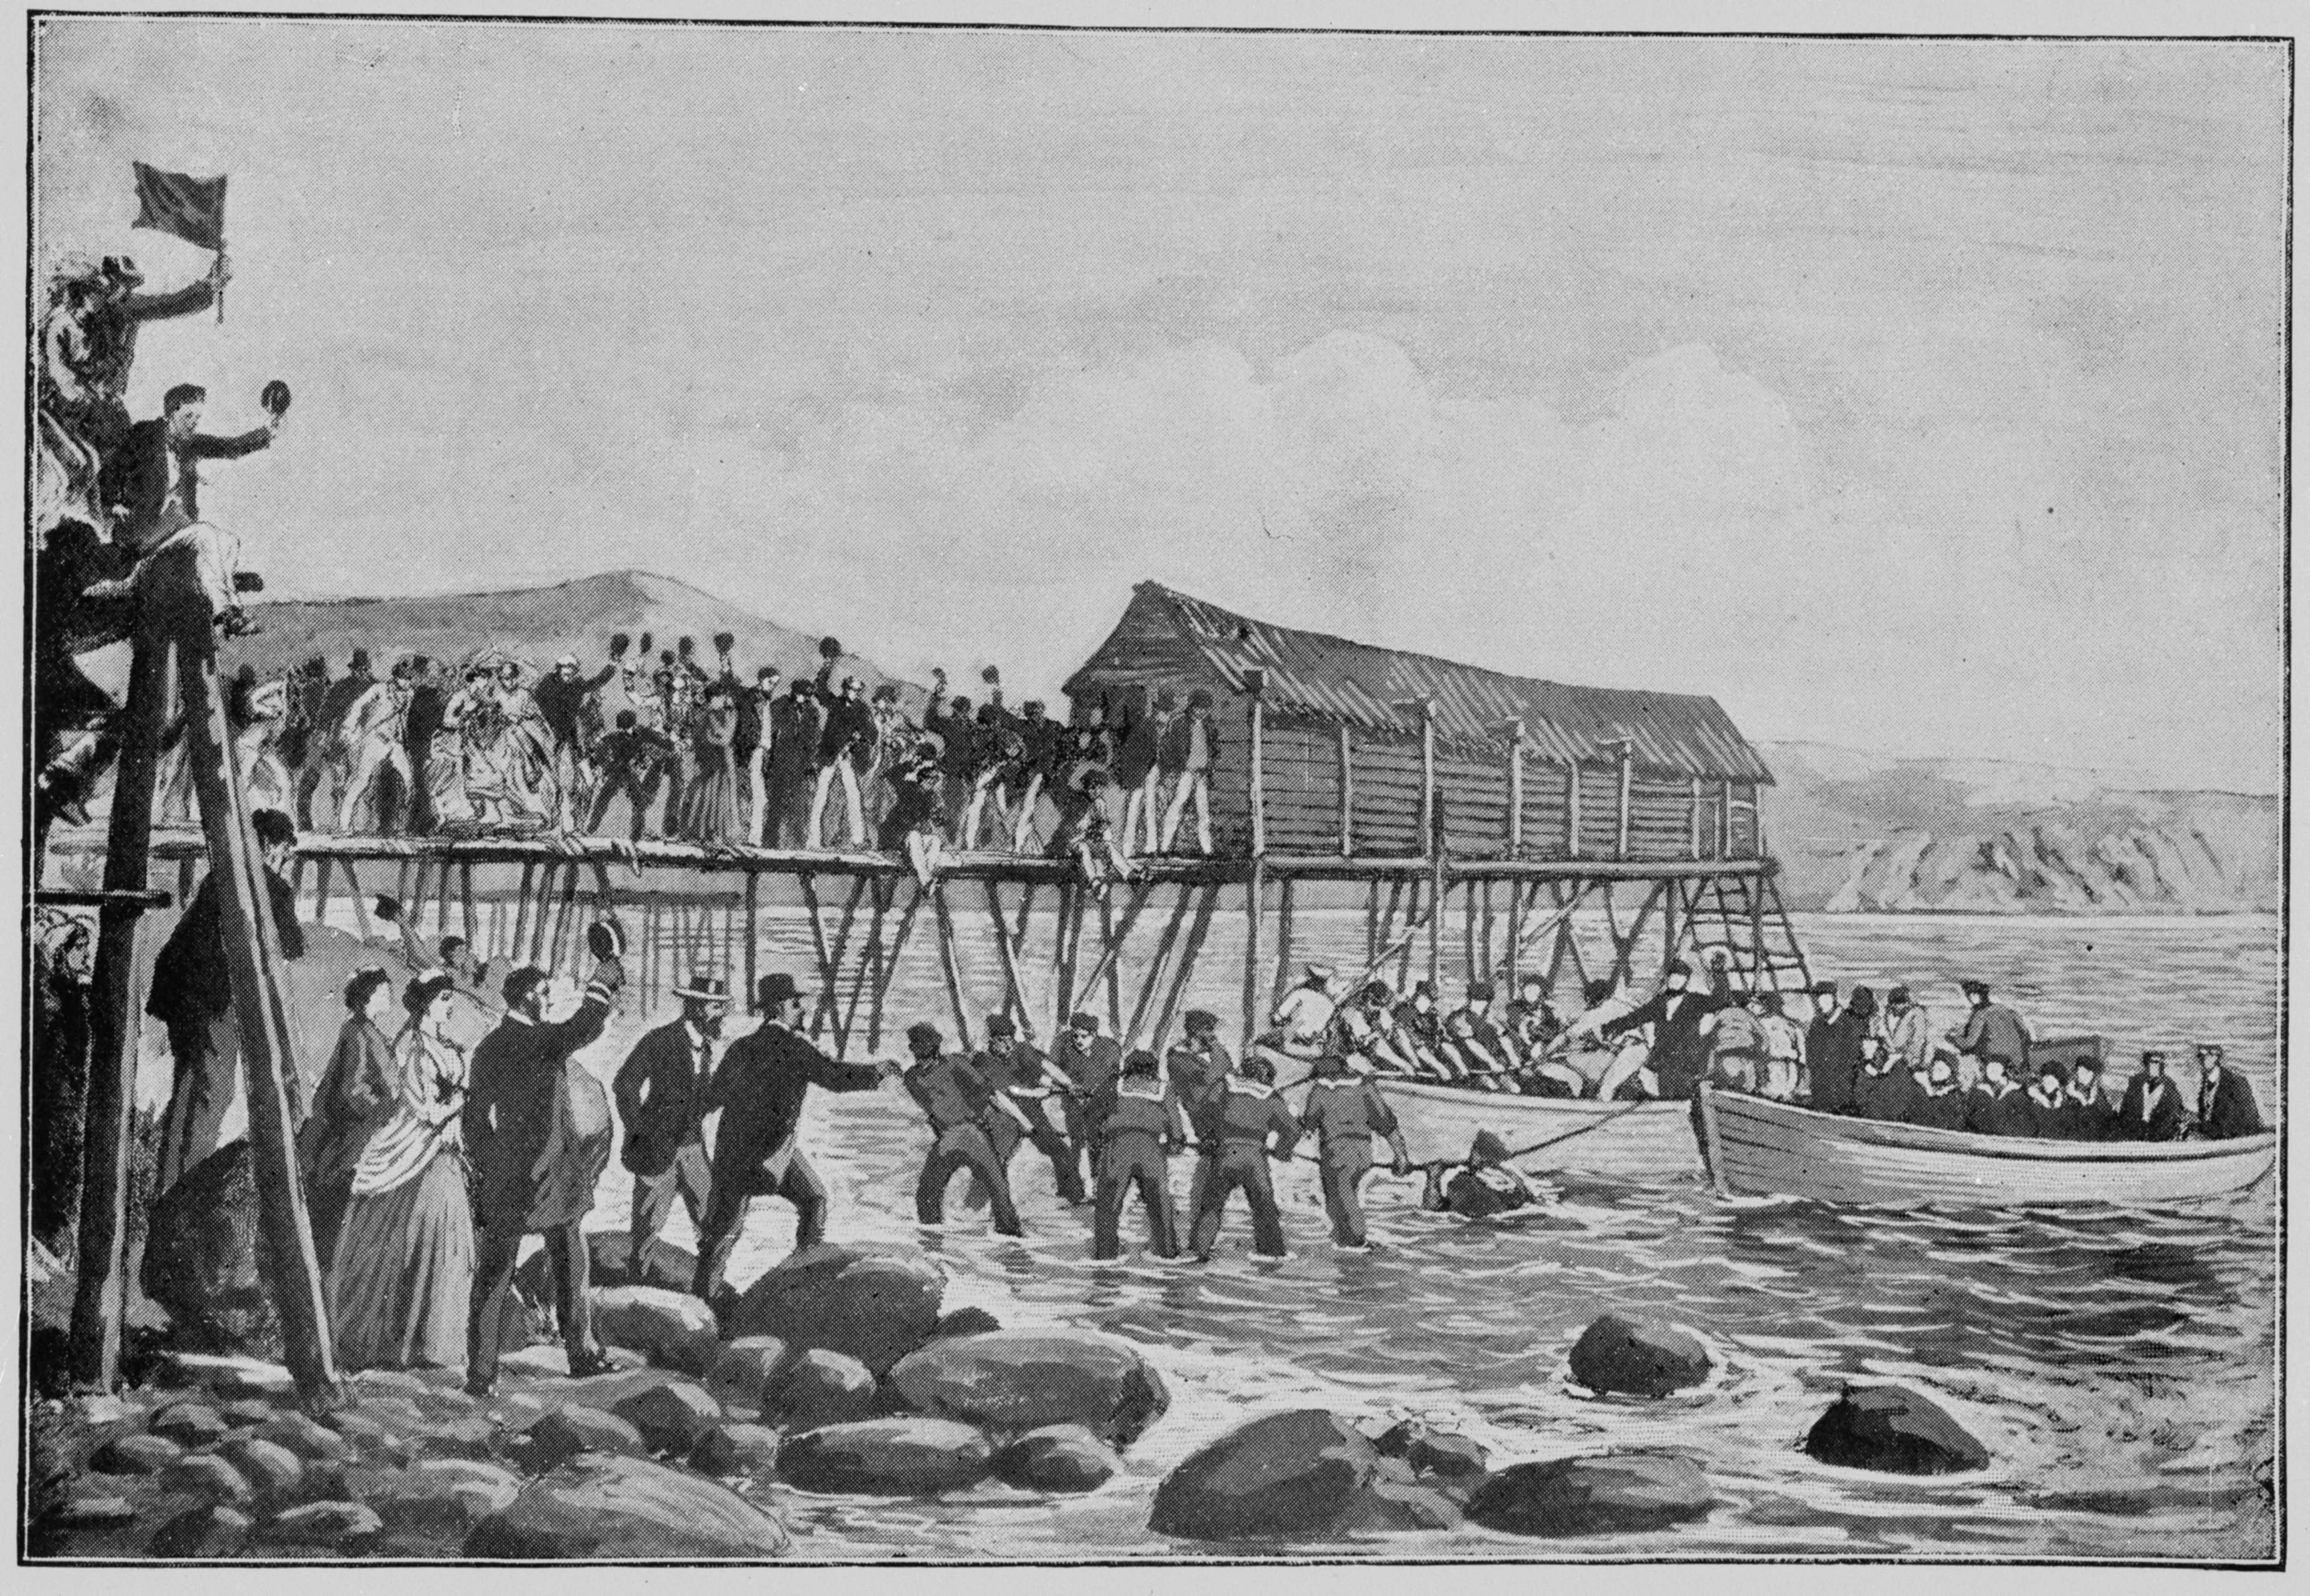 An illustration depicts the landing of the end of the first transatlantic telegraph cable in 1858